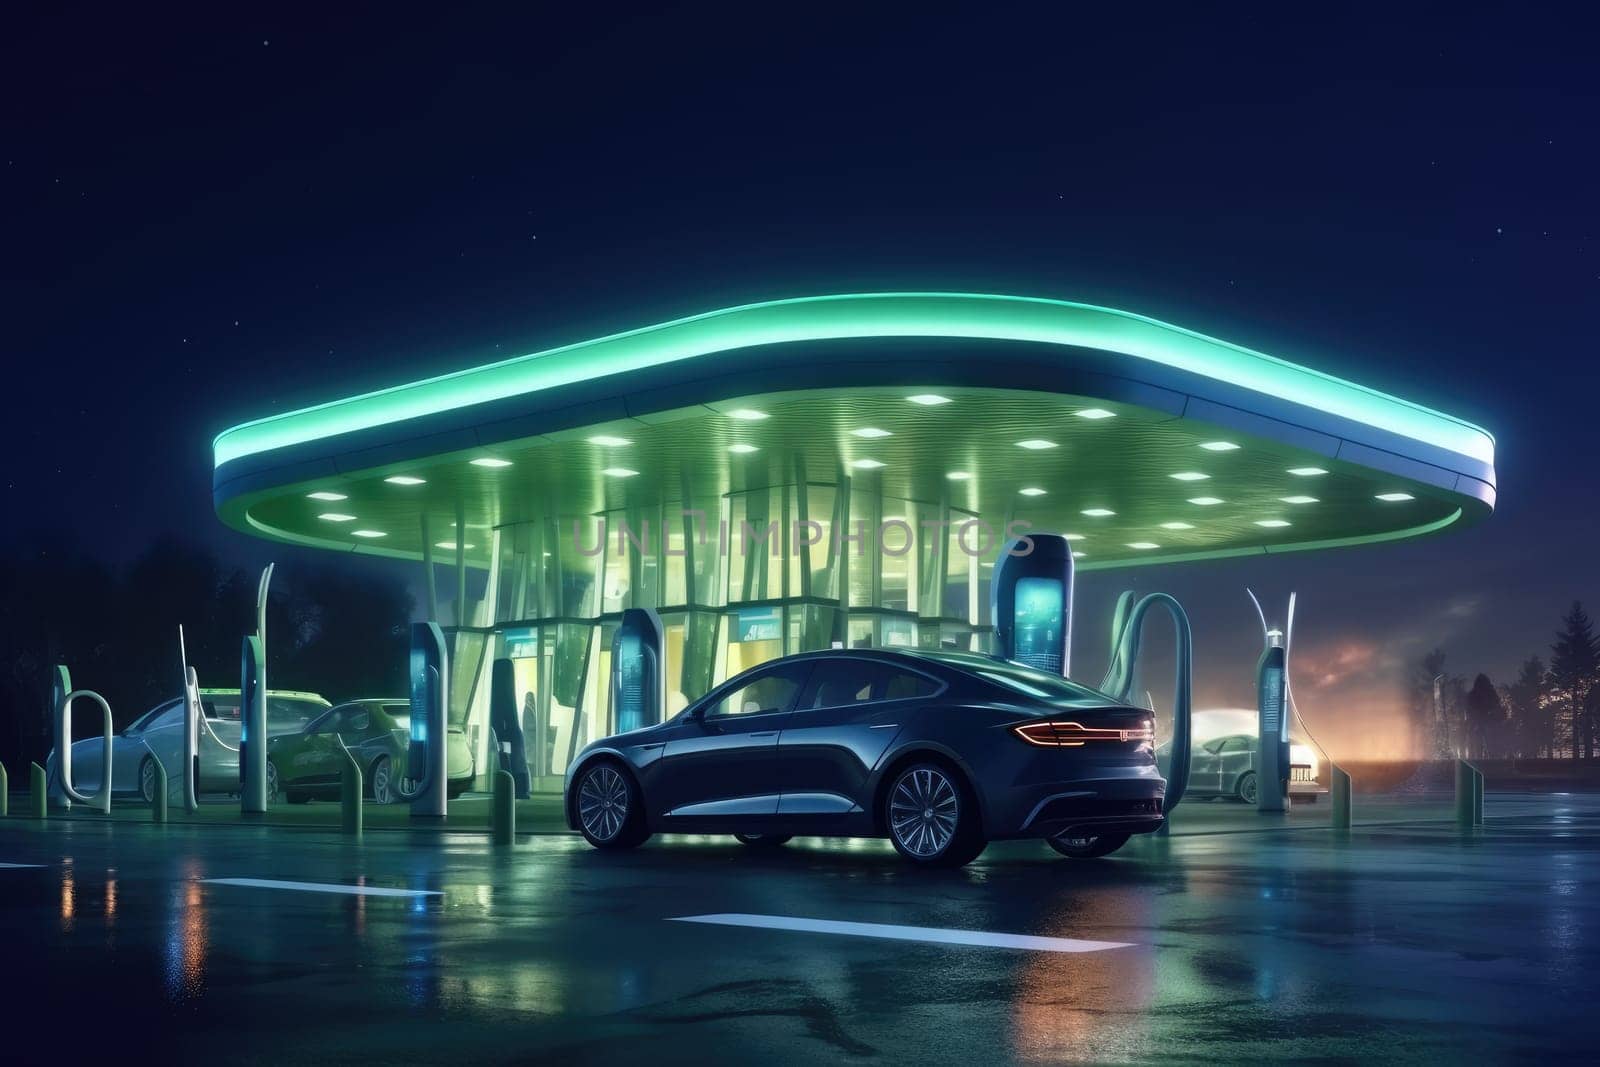 24/7 Green Energy: Nighttime Image of Electric Cars Charging at Station Reflects Accessibility by Yurich32